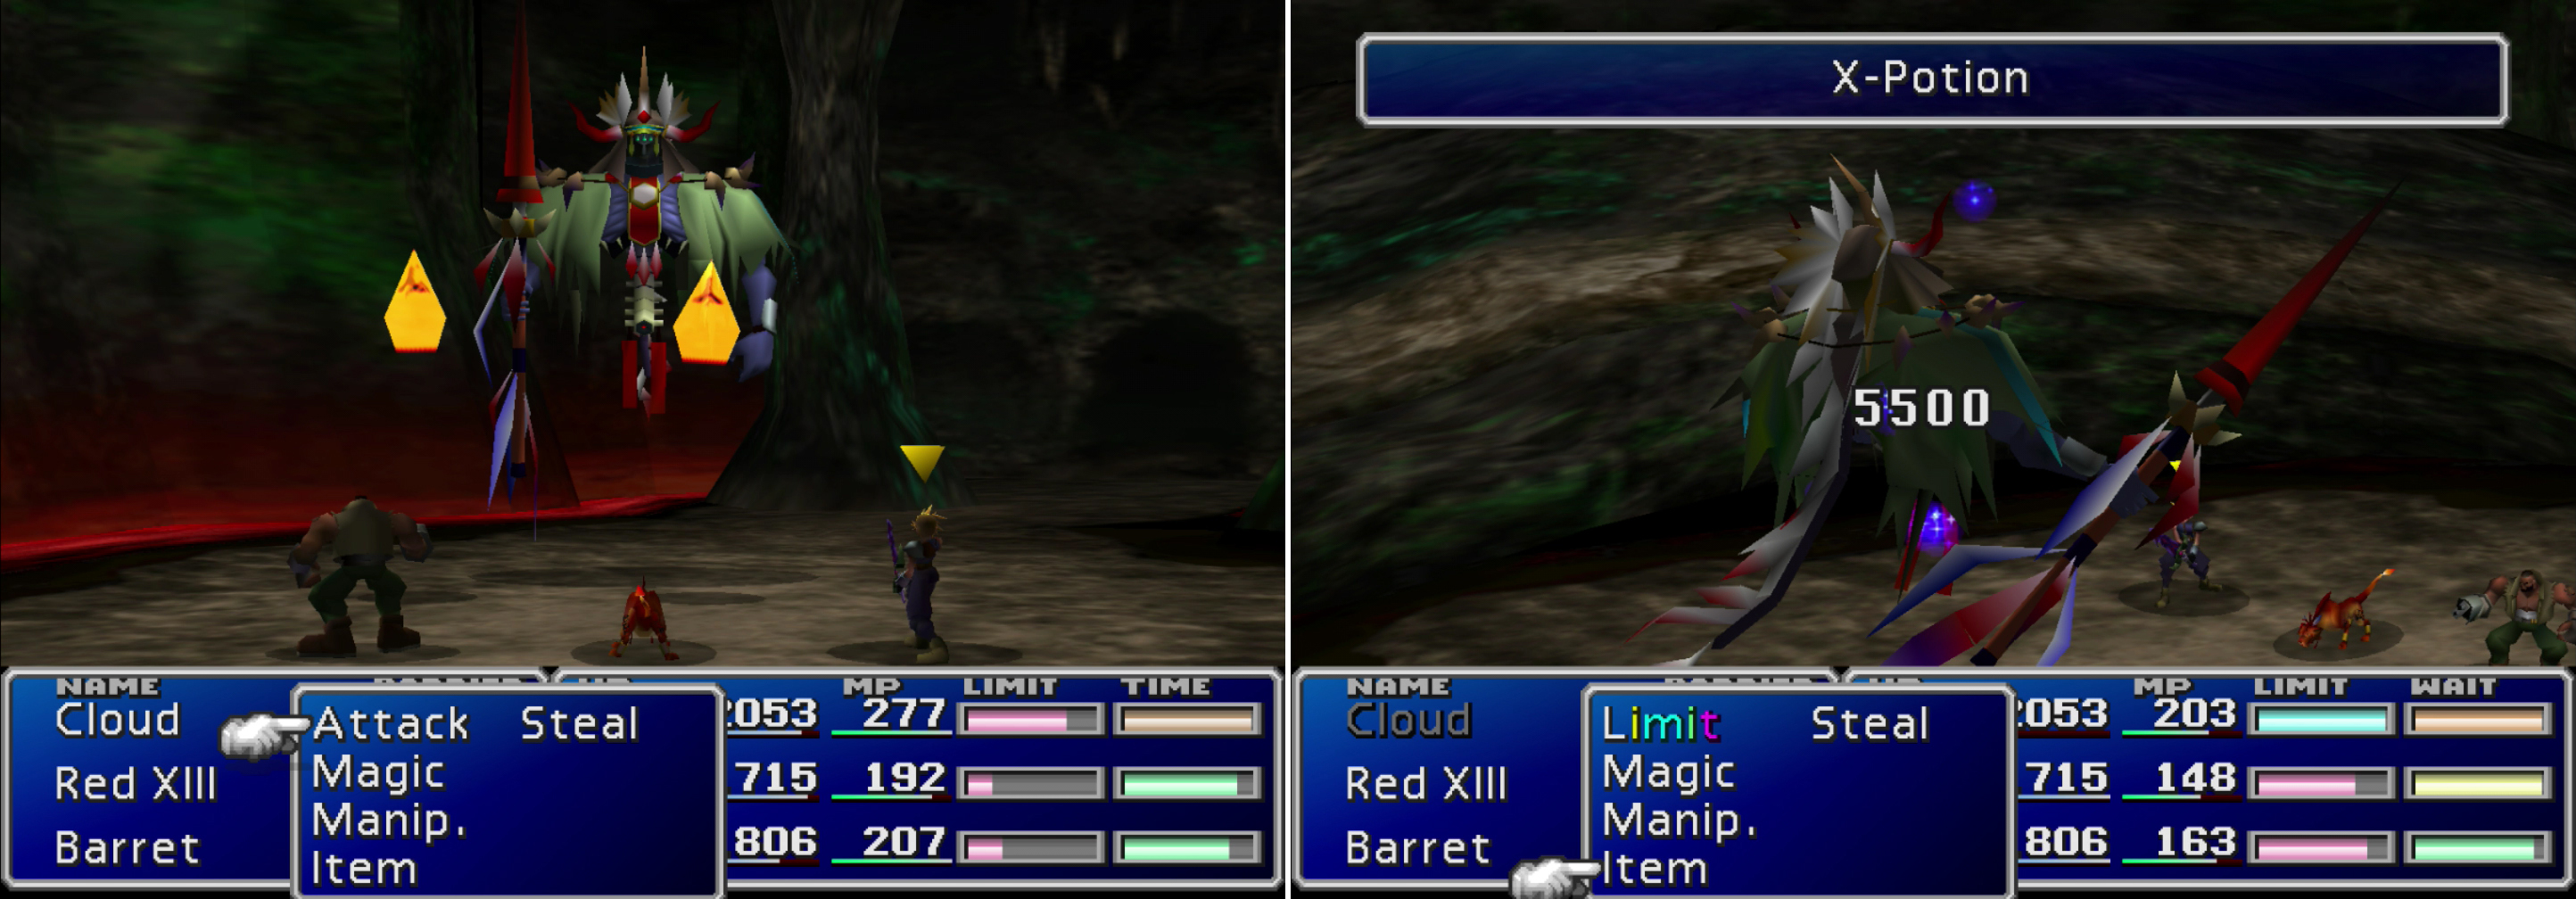 Gi Nattack is joined by two Soul Fire minion, who are only too happy to inflict fire damage on the party (left). If you've willing to spare an X-Potion, Gi Nattack can be killed in a single move (right). It doesn't pay to be undead in a Final Fantasy game.